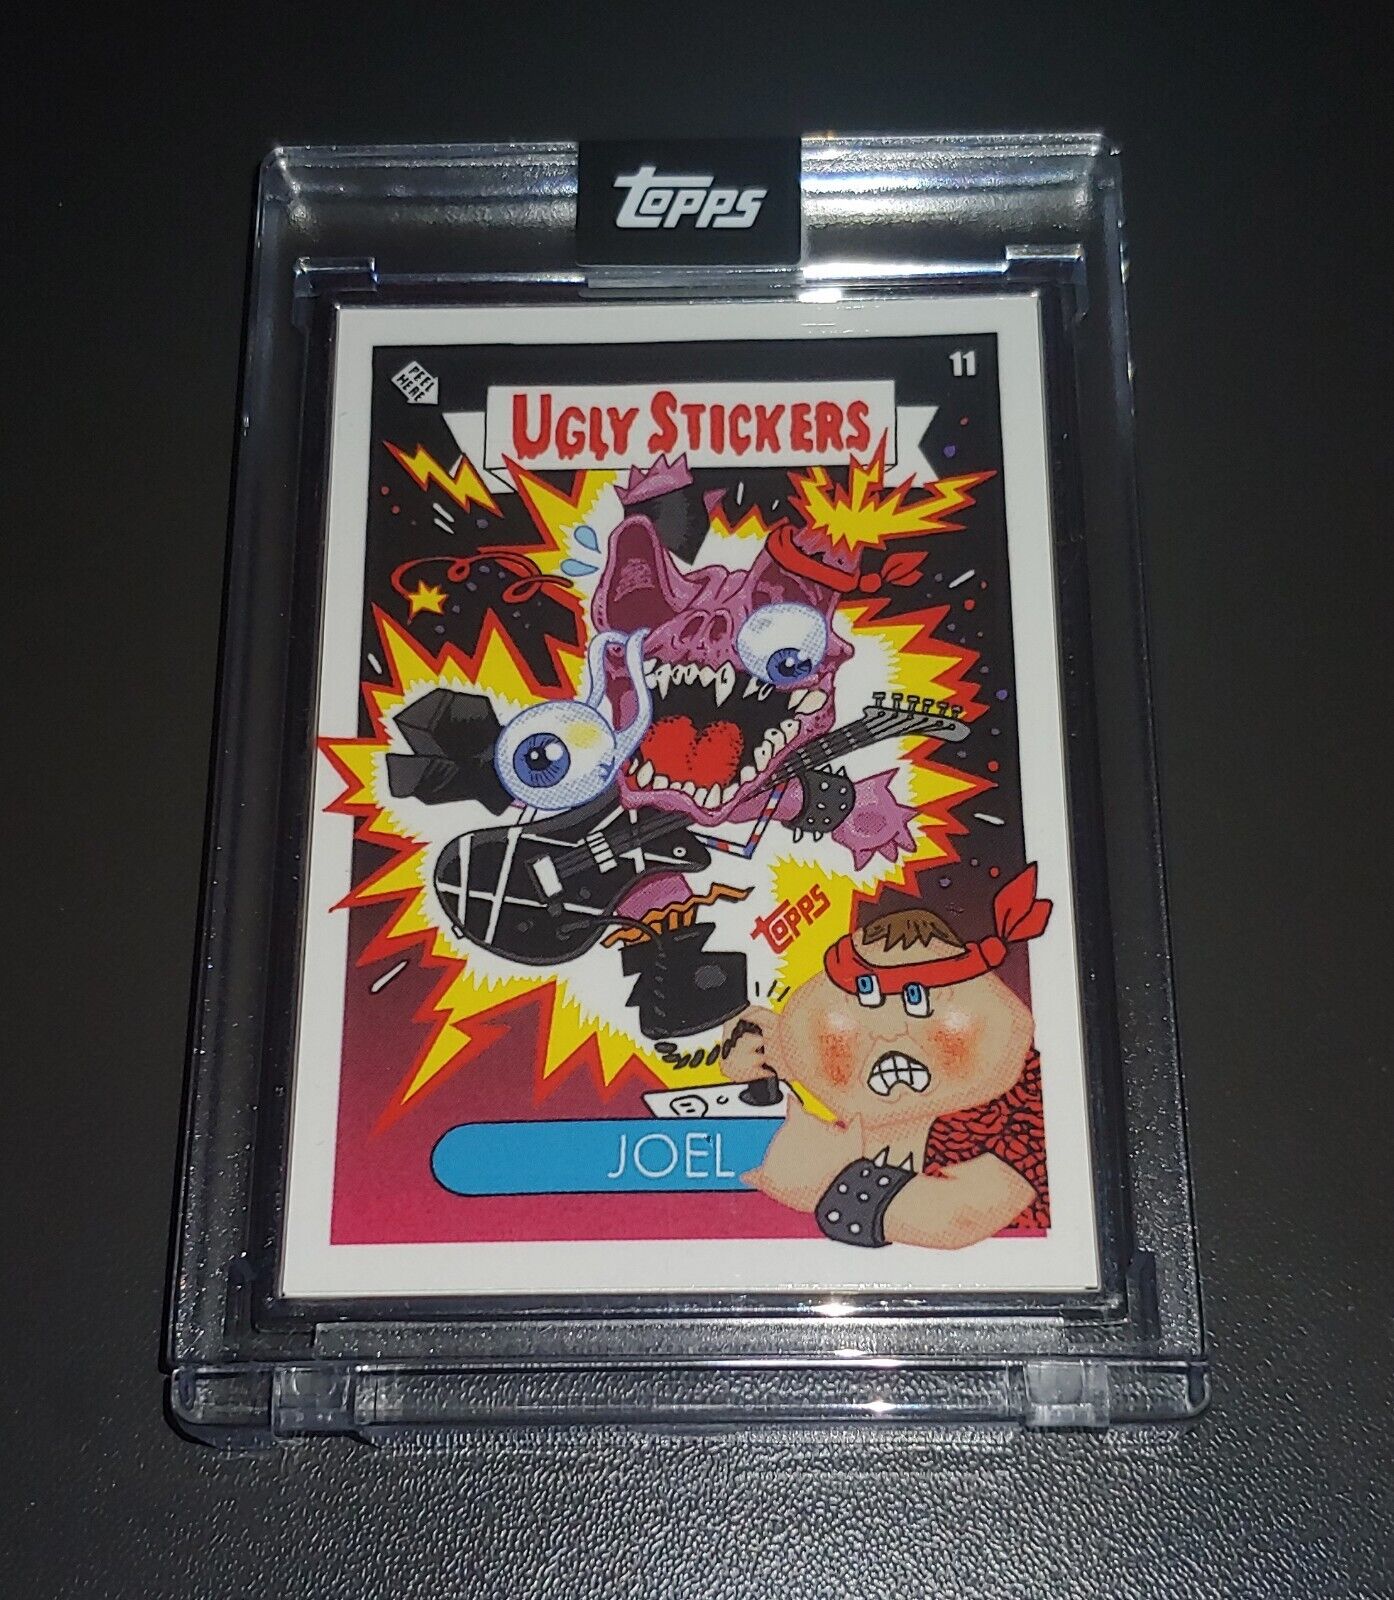 Garbage Pail Kids Ermsy Ugly Stickers 48/49 JOEL #11 Hand-Signed Artist Proof